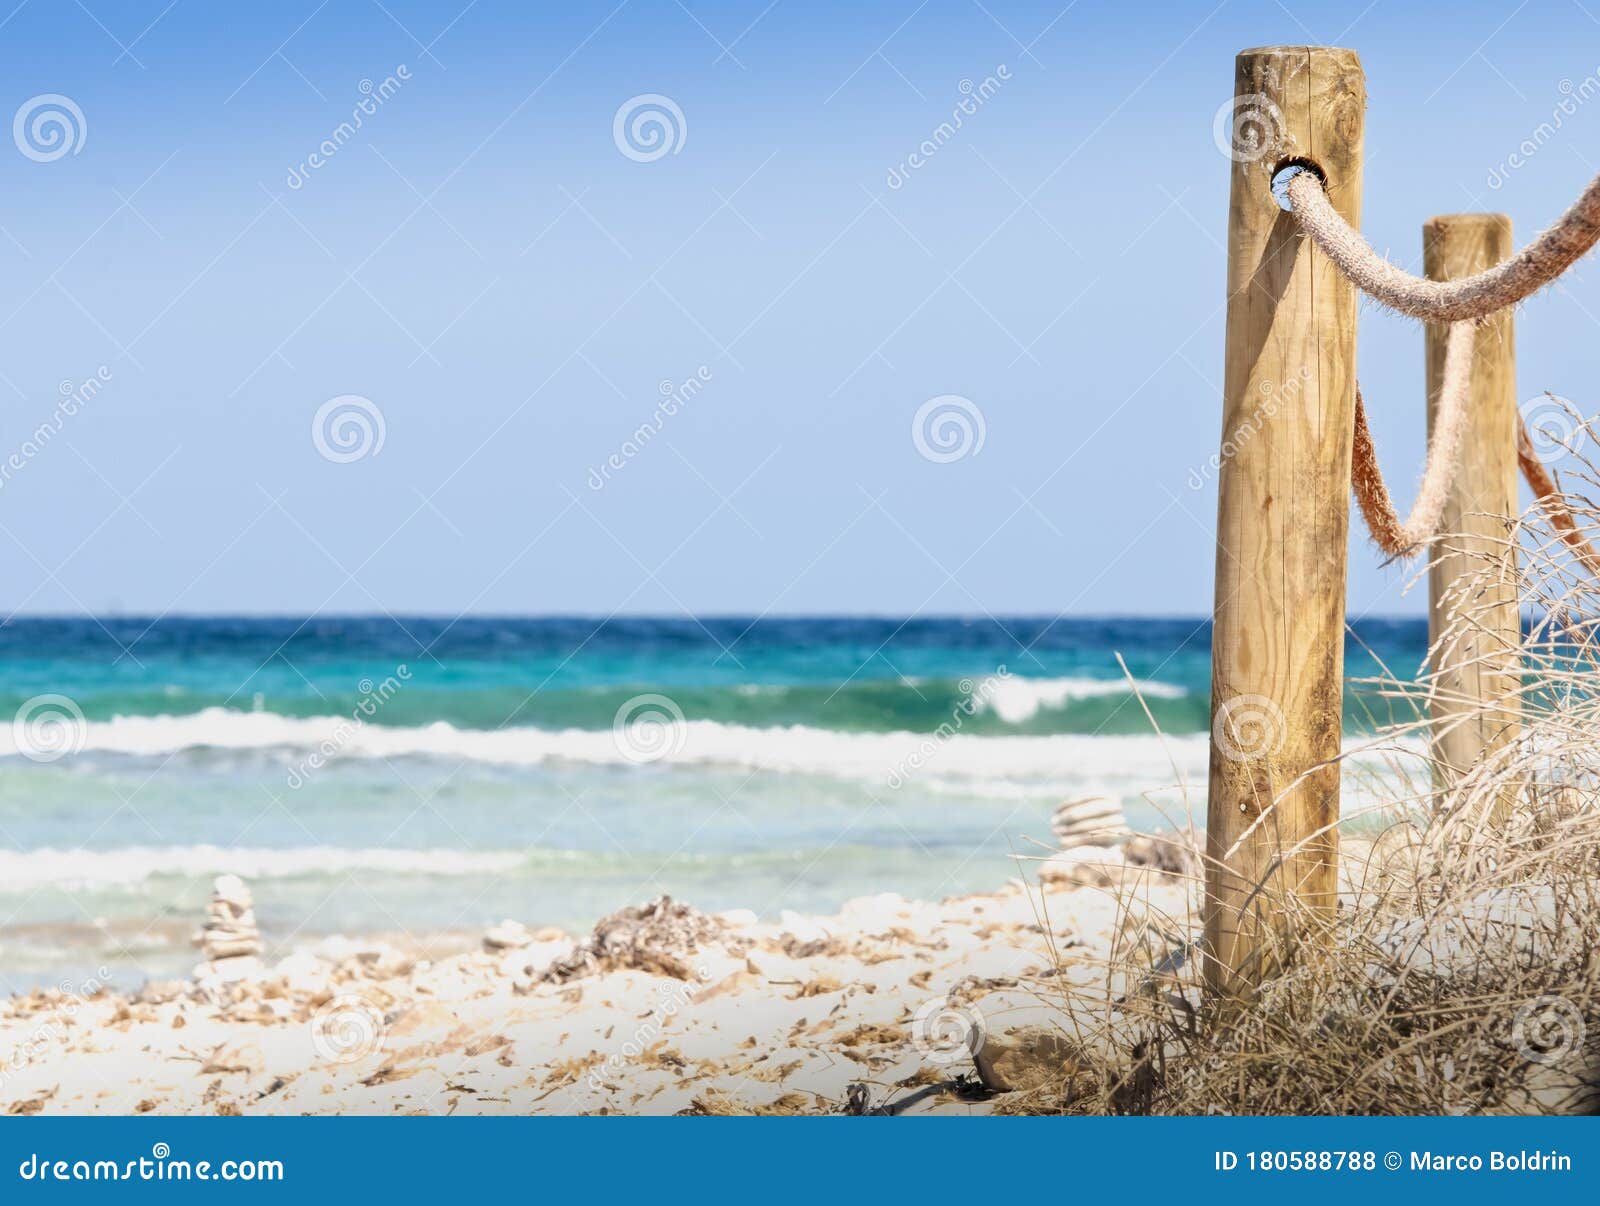 rustic fence with wooden poles and rope on a deserted beach, in the background the rough sea